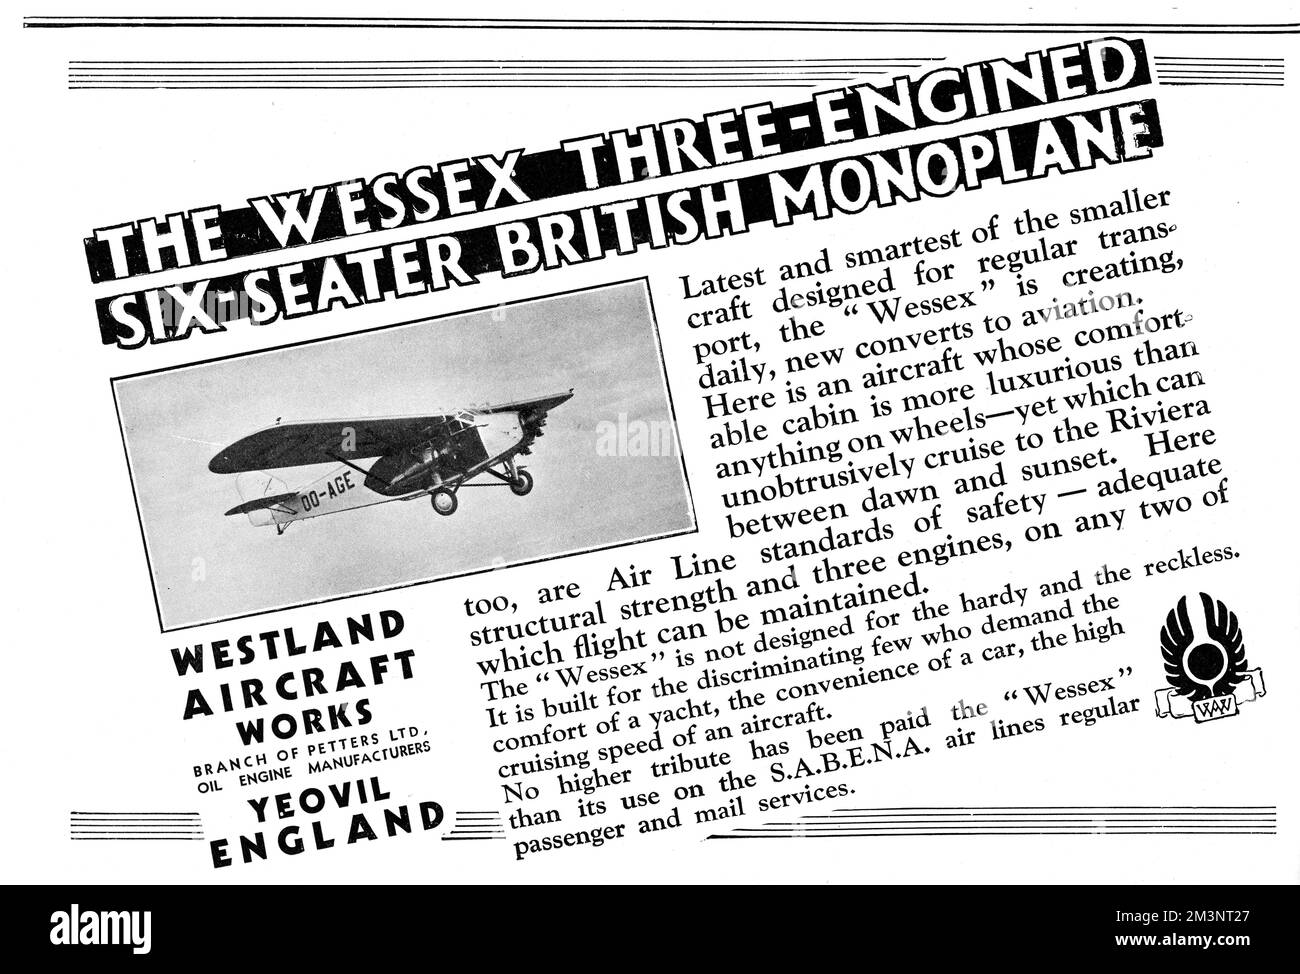 Advertisement for the Wessex, three-engined, six-seater British monoplane from the Westland Aircraft Works in Yeovil, England, 'the latest and smartest of the smaller craft'.       Date: 1930 Stock Photo